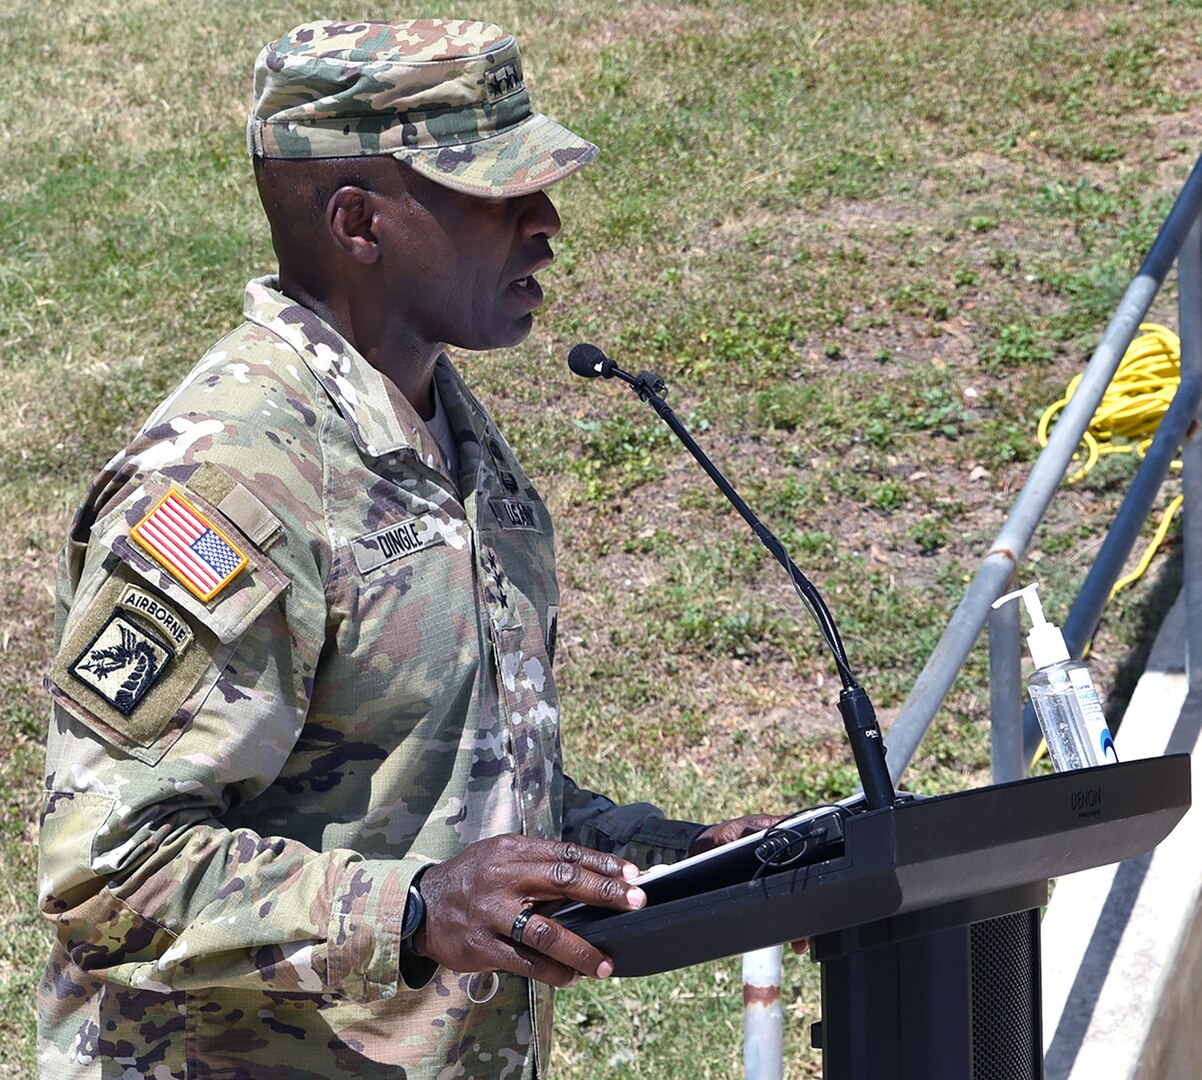 U.S. Army Surgeon General and commanding general, U.S. Army Medical Command, Lt. Gen. R. Scott Dingle, addresses the audience during his assumption of command ceremony at the AMEDD museum at Joint Base San Antonio-Fort Sam Houston June 24.